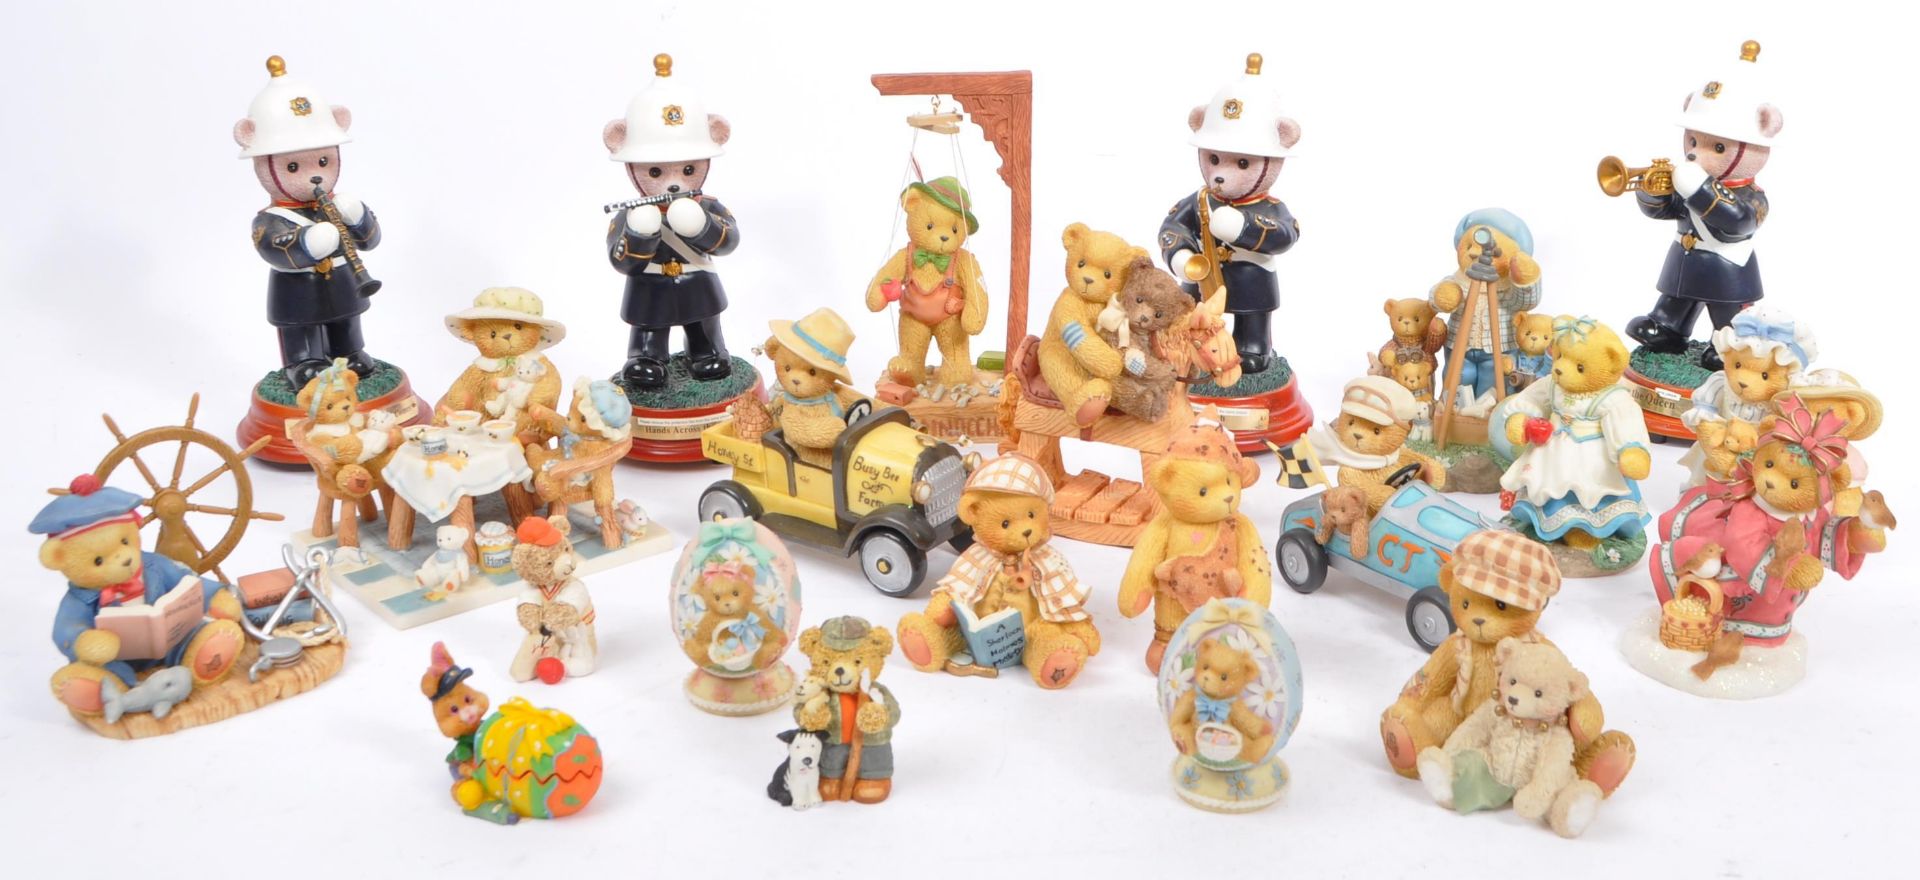 COLLECTION OF CHERISHED TEDDIES FIGURINES